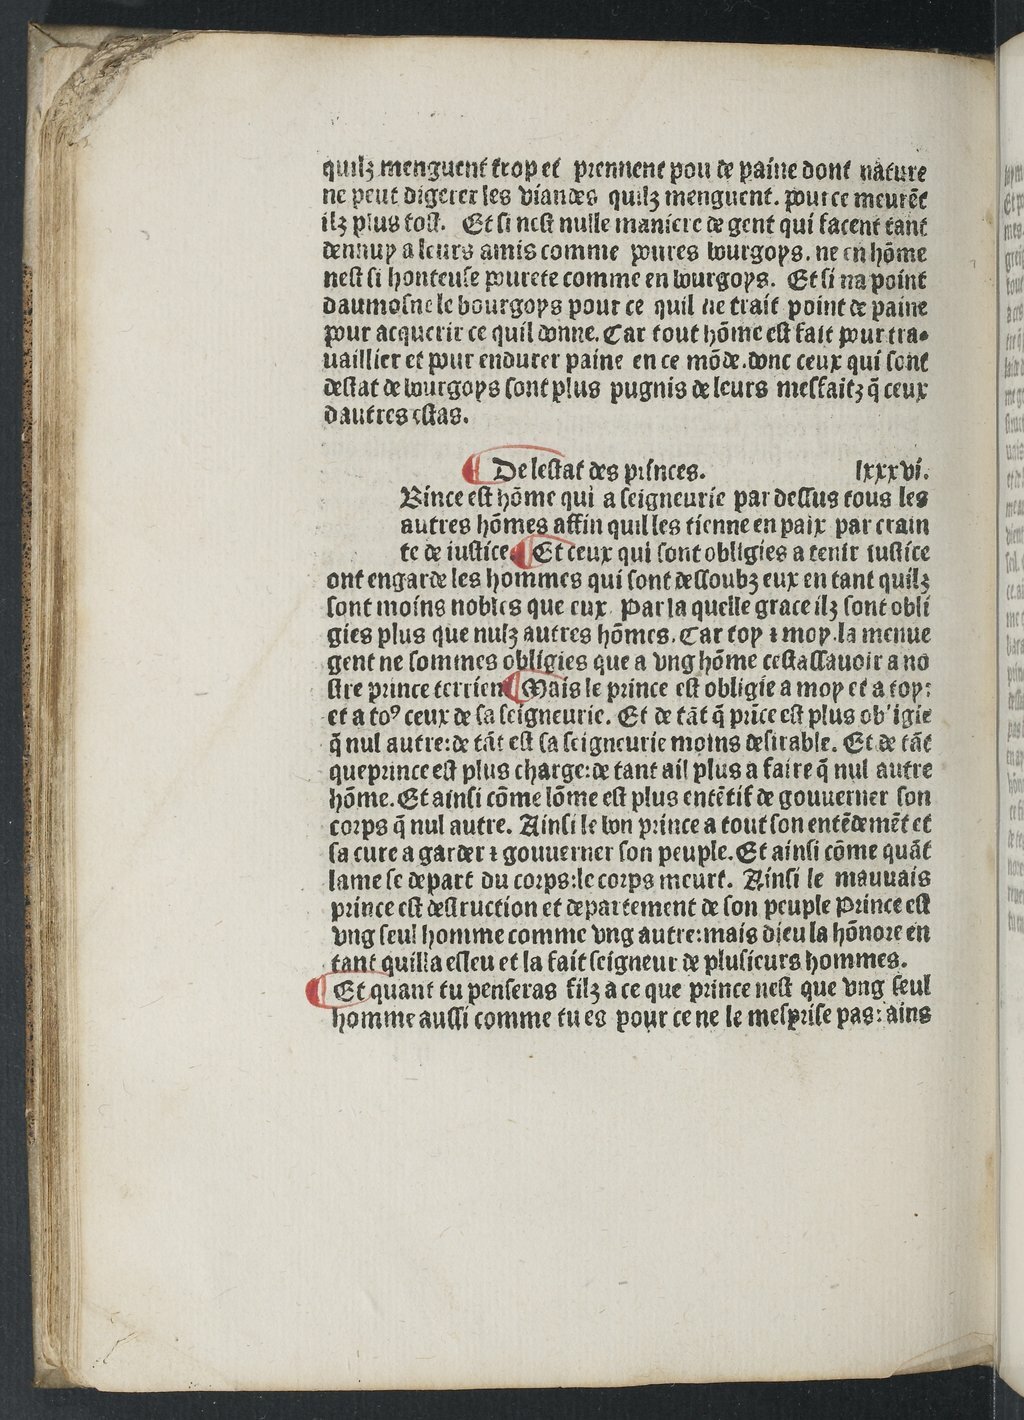 1482 [Antoine Caillaut] Trésor des humains BnF_Page_116.jpg